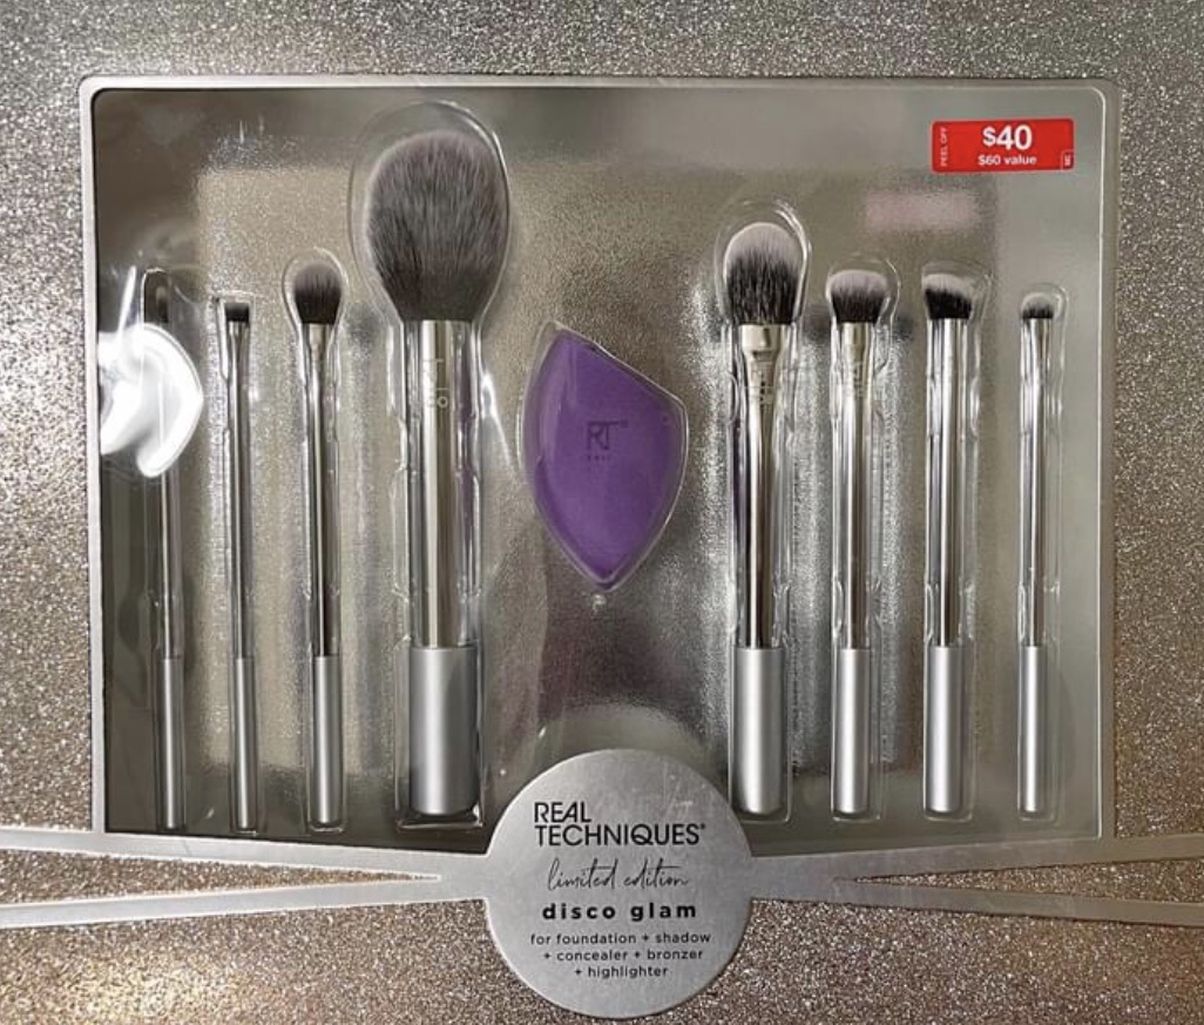 Real Tecniques Special Edition Brushes